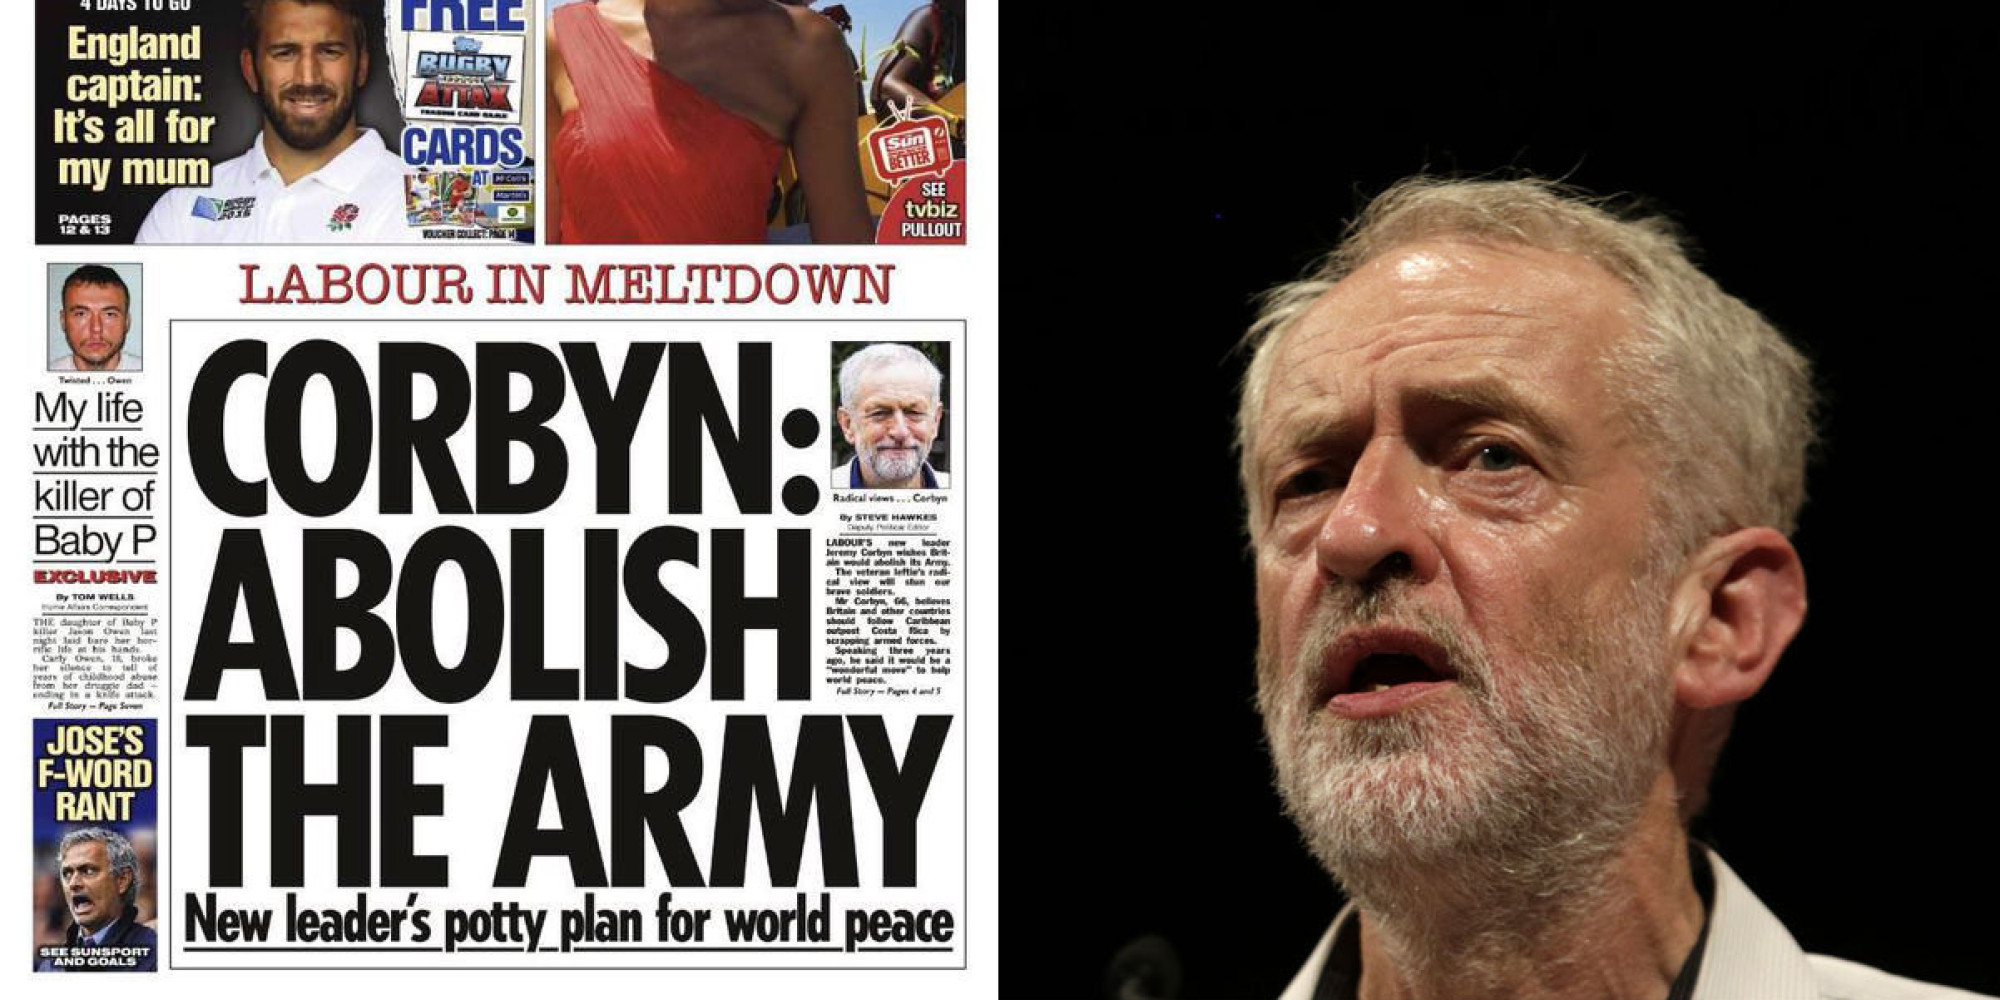 Jeremy Corbyn Wants To Abolish The Army, Apparently | HuffPost UK2000 x 1000